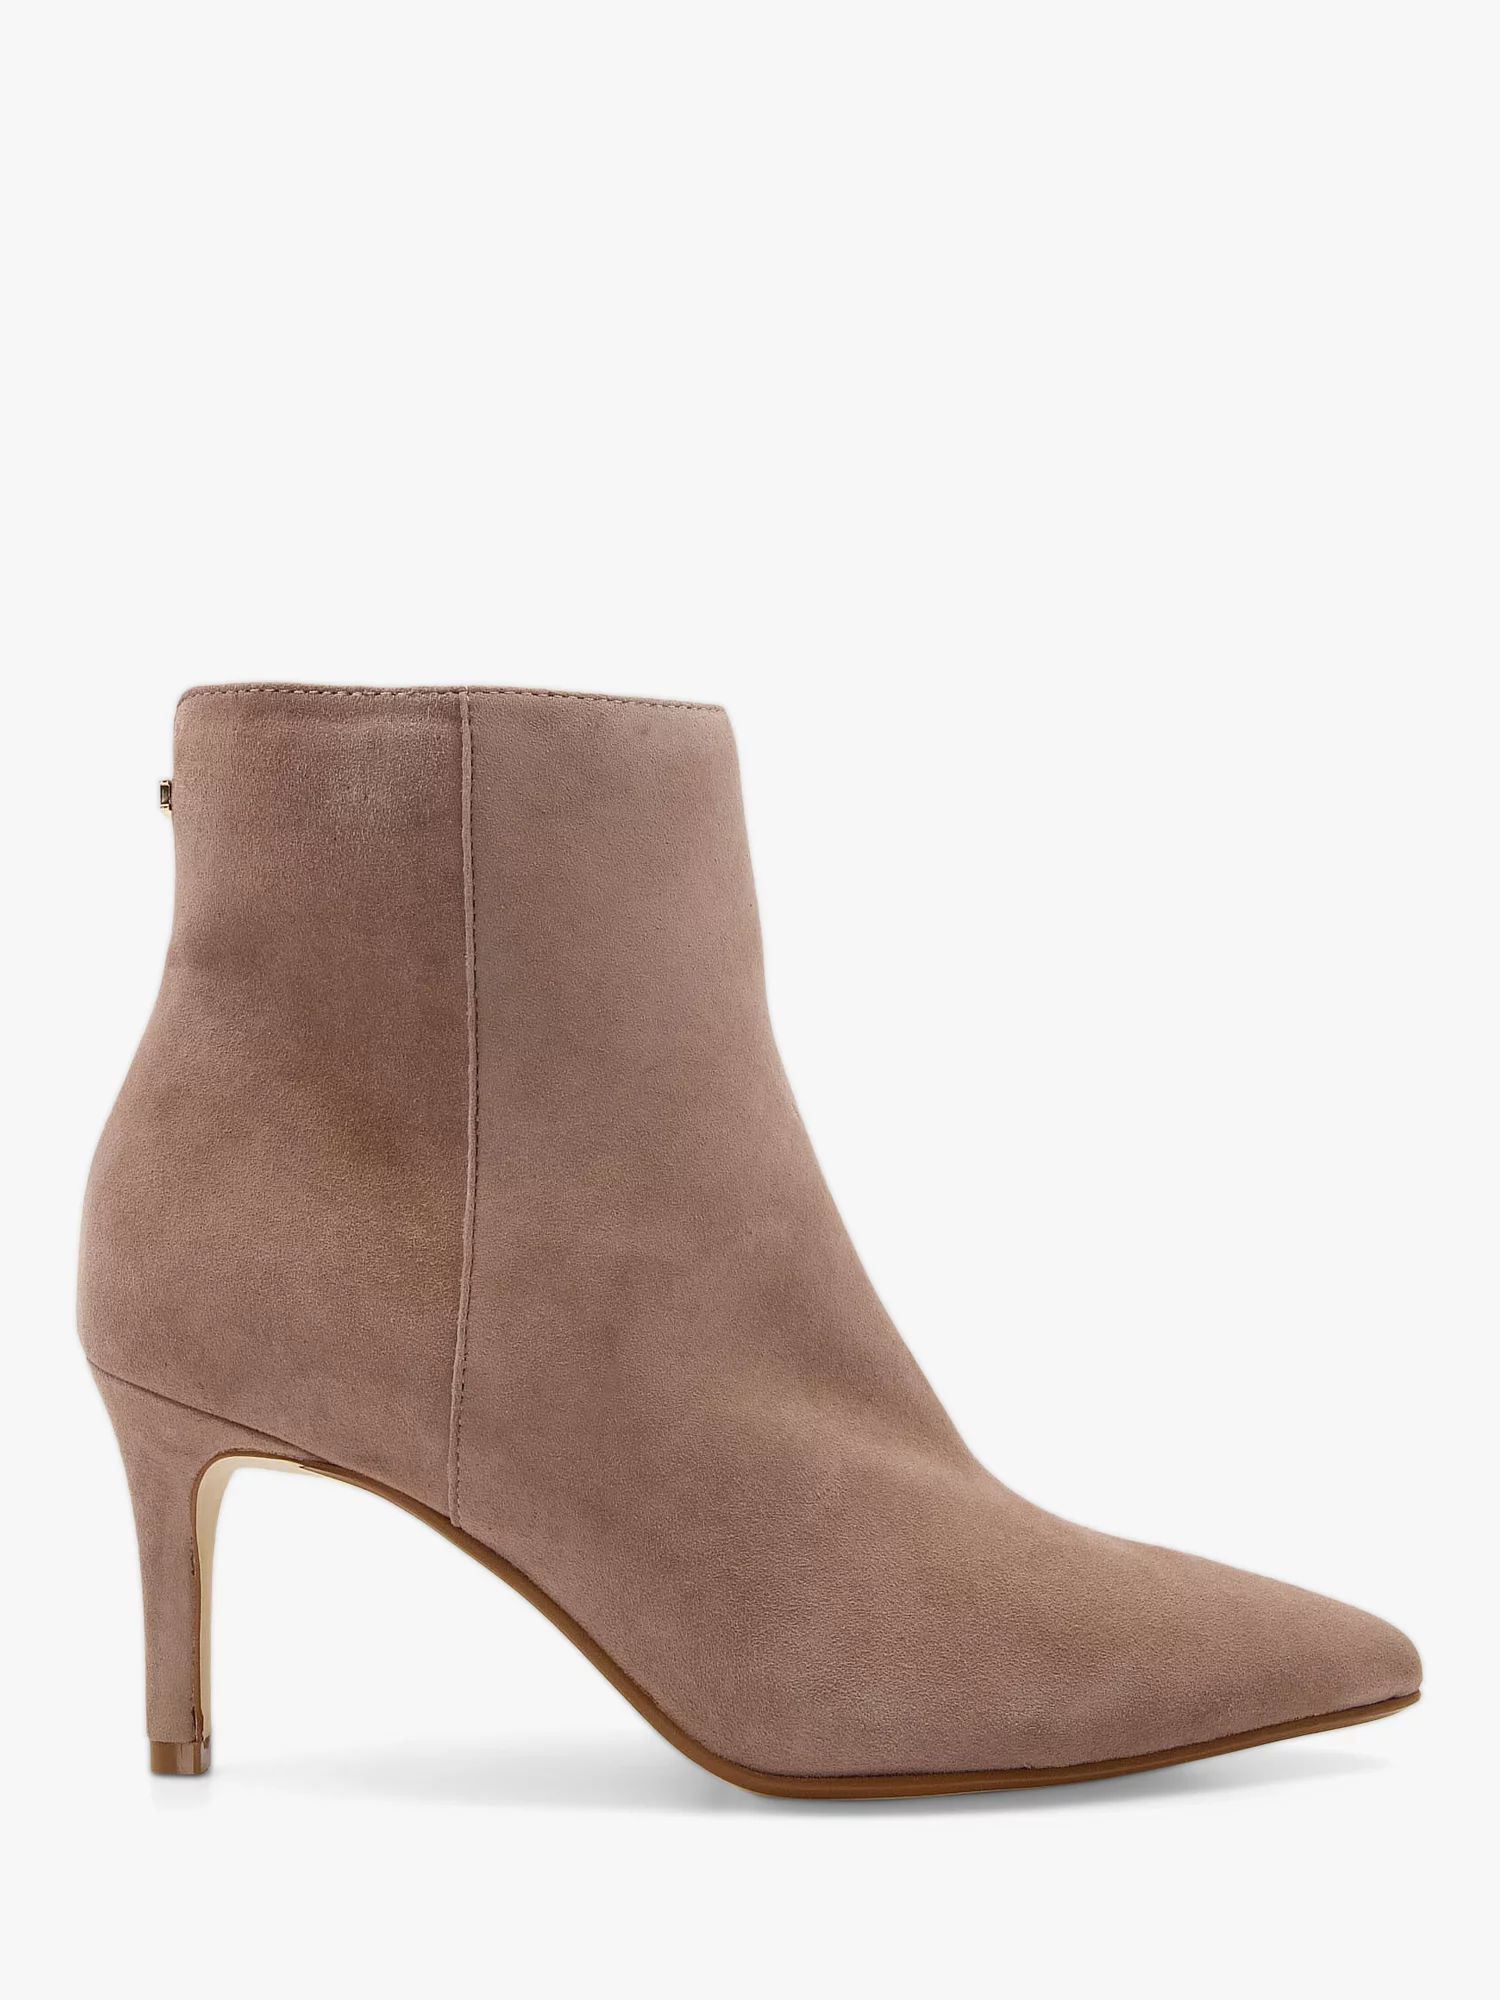 Dune Obsessive 2 Suede Ankle Boots, Taupe | John Lewis (UK)